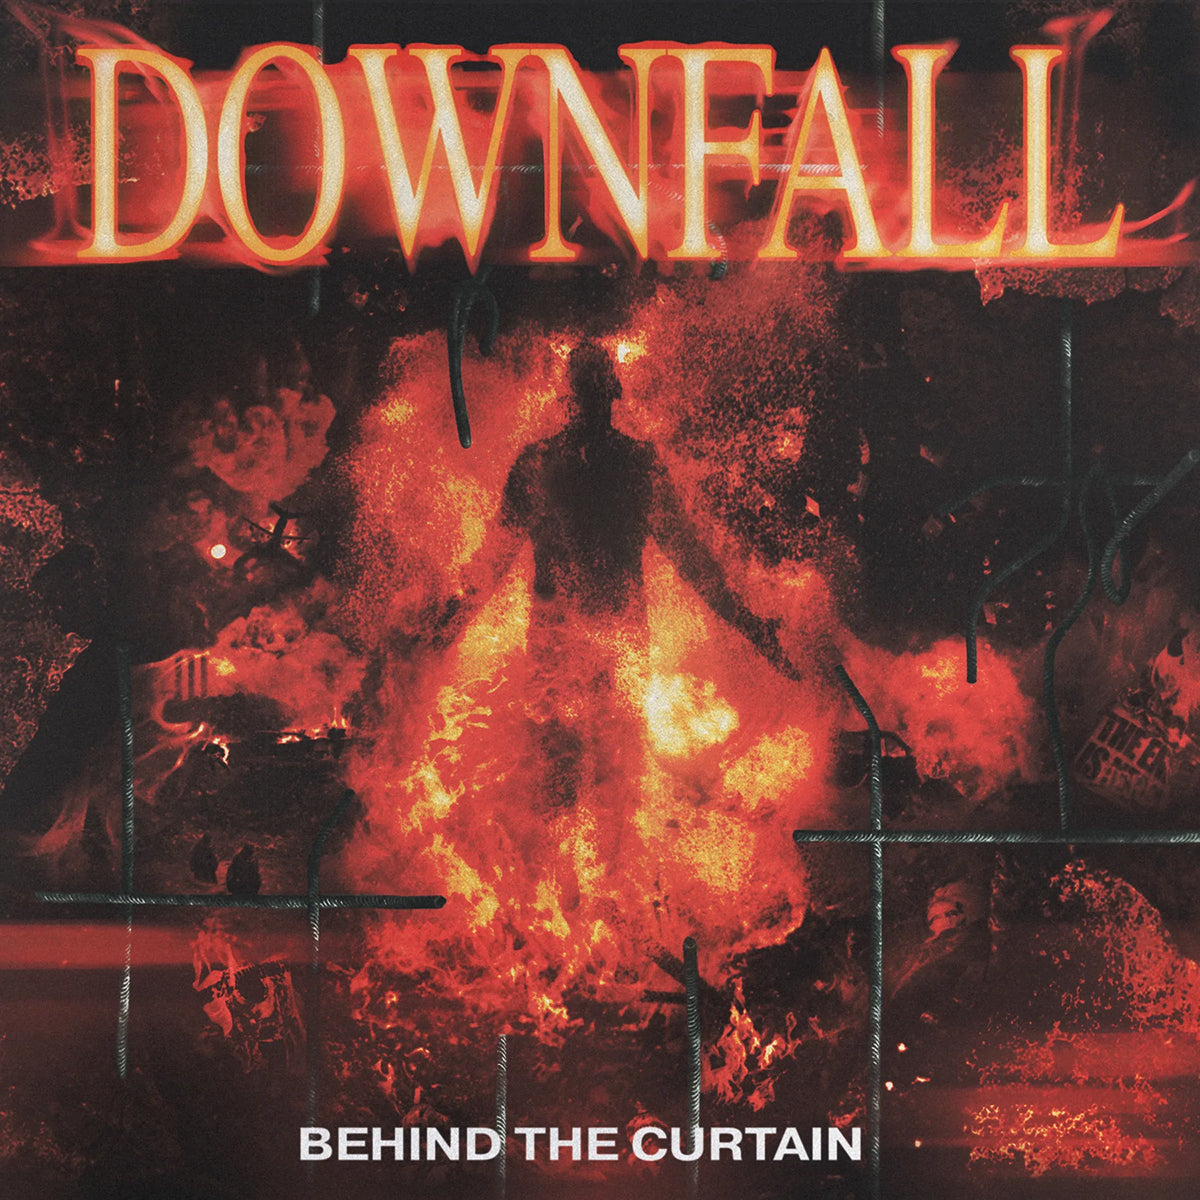 DOWNFALL "Behind The Curtain" LP